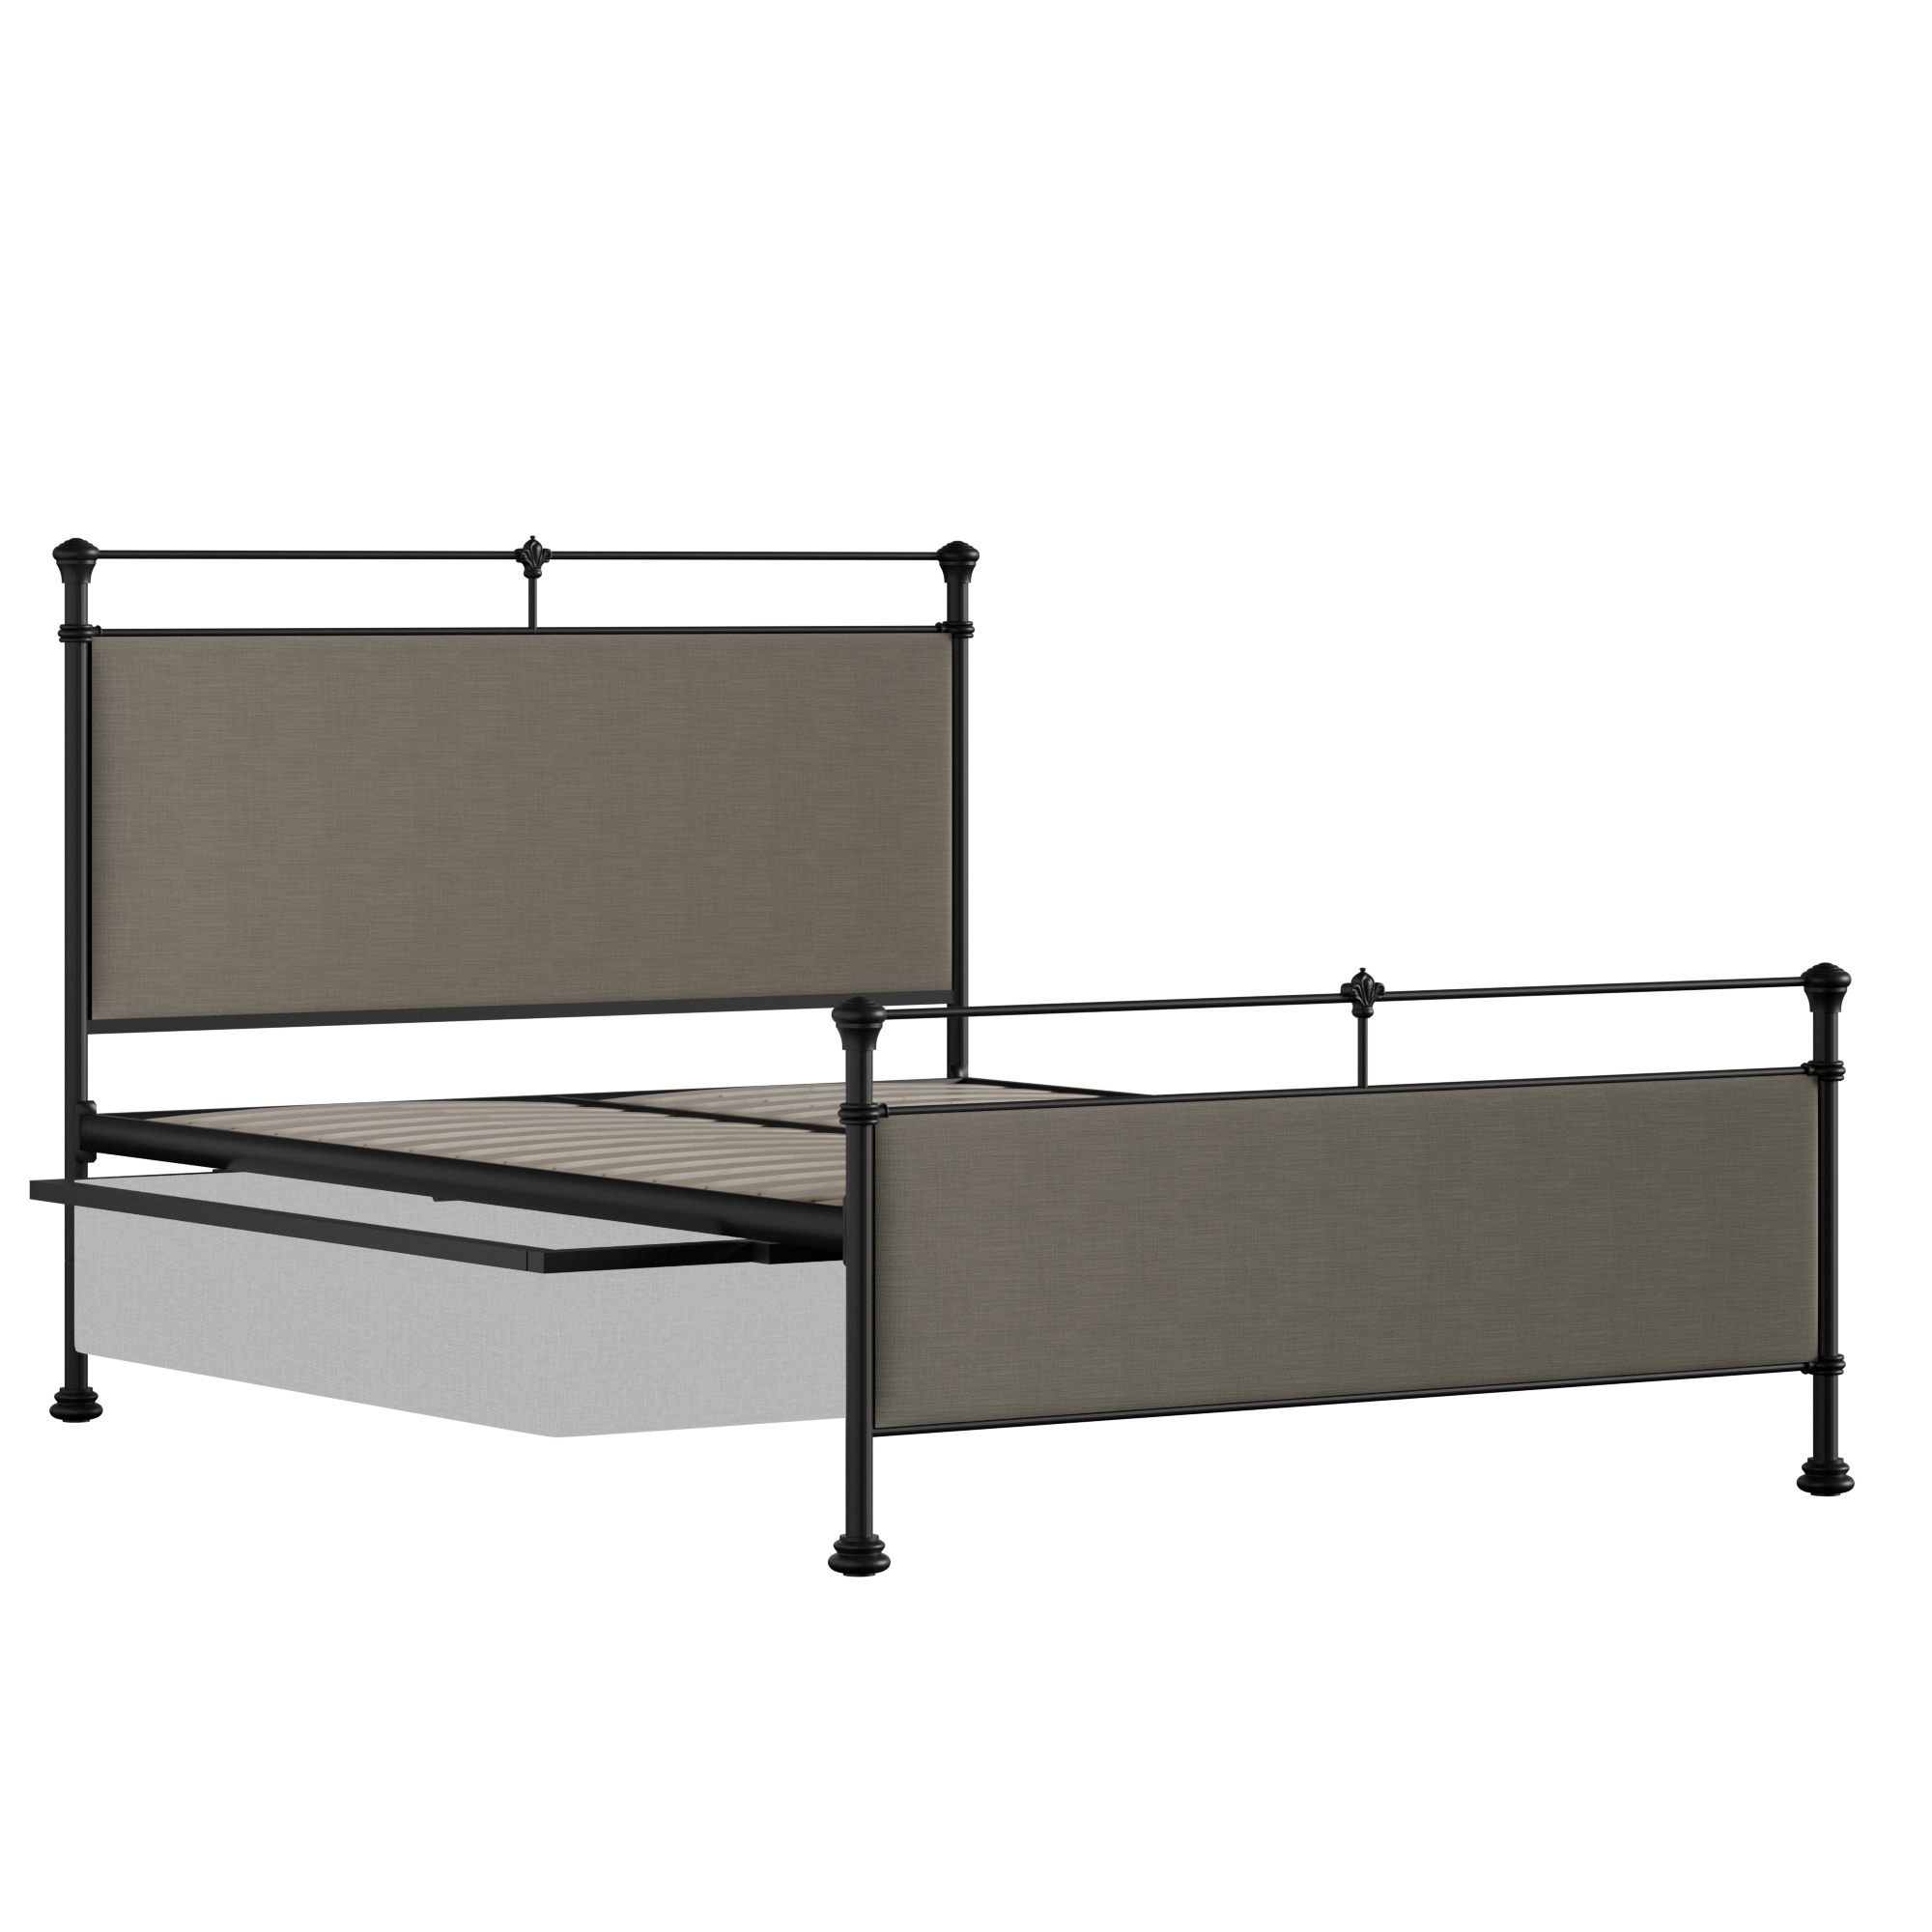 Nancy iron/metal upholstered bed in black with drawers